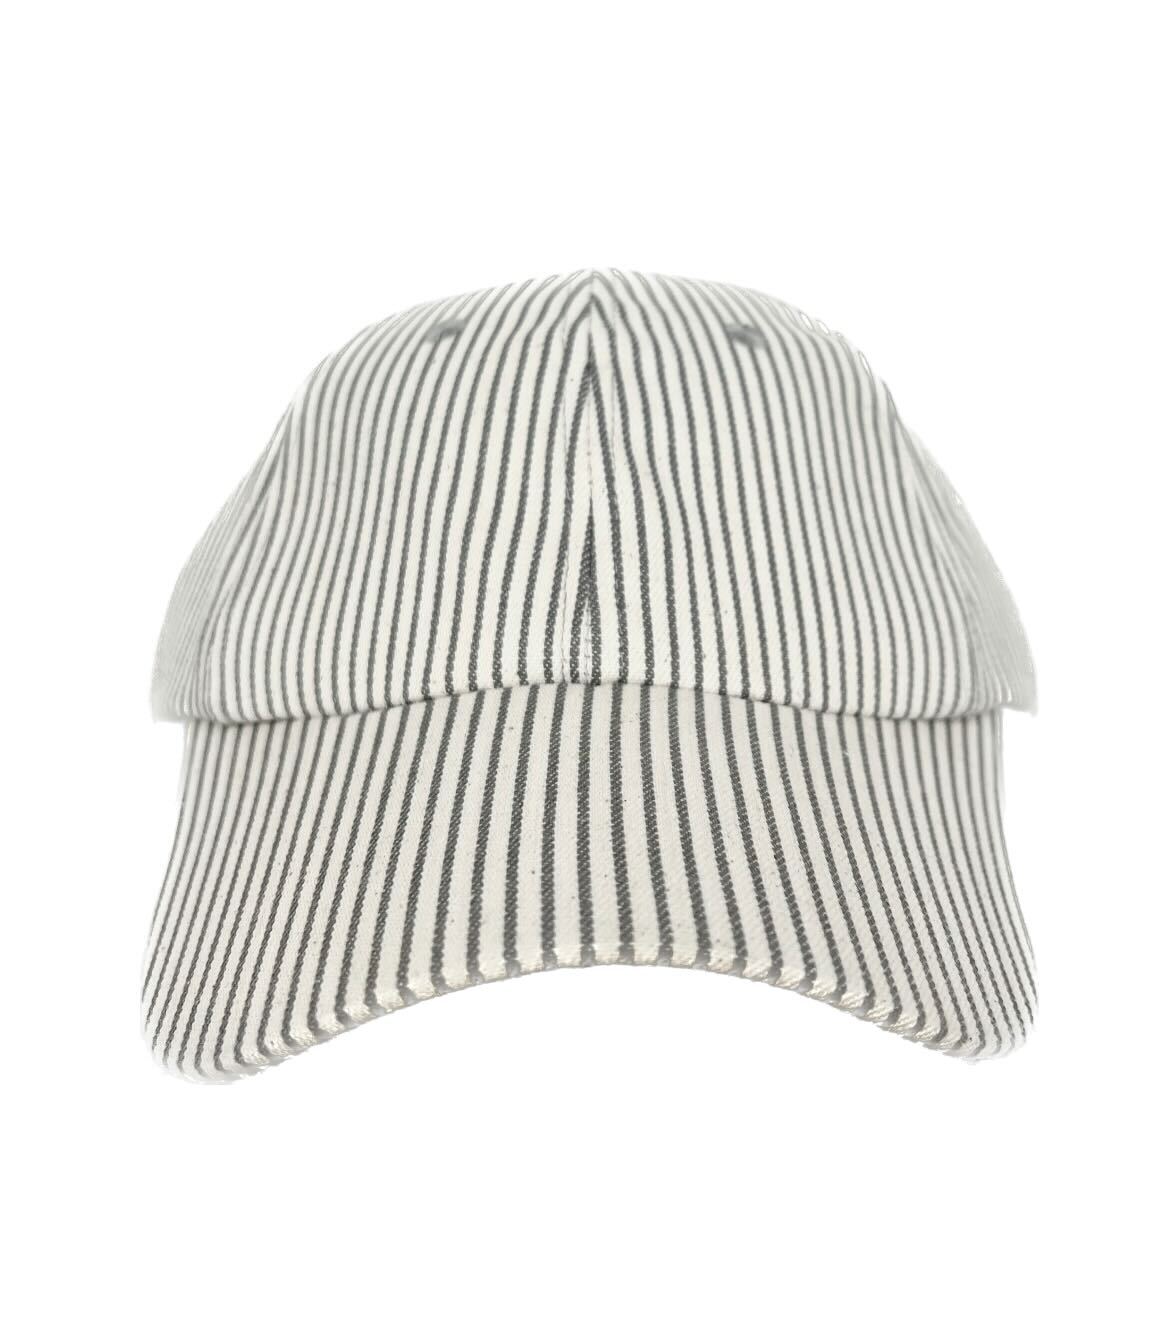 White Hat With Grey stripes